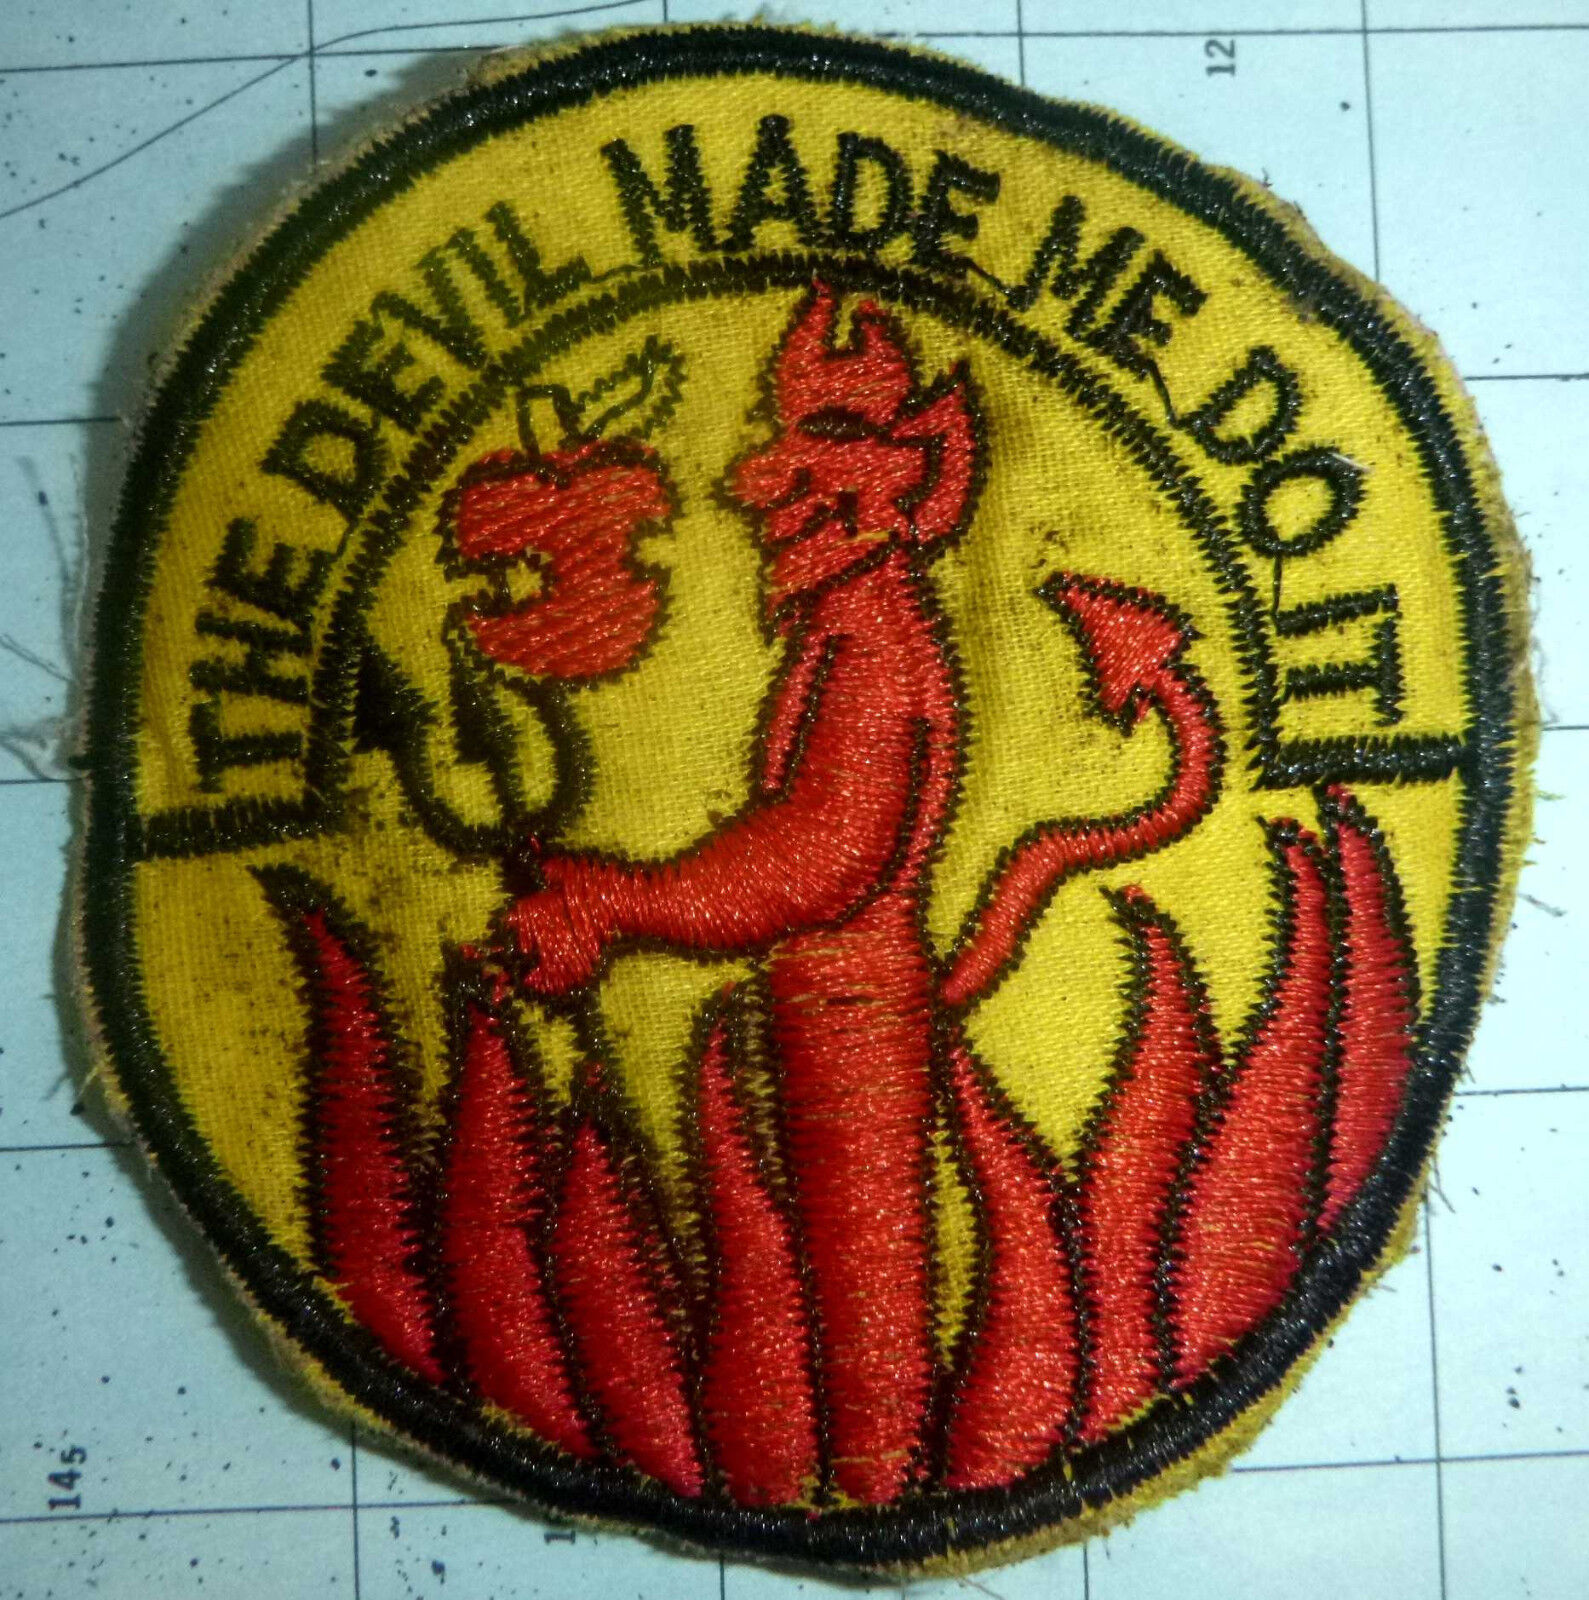 THE DEVIL MADE ME DO IT - Patch - USAF THAILAND SPECIAL OPS - Vietnam War, M.424